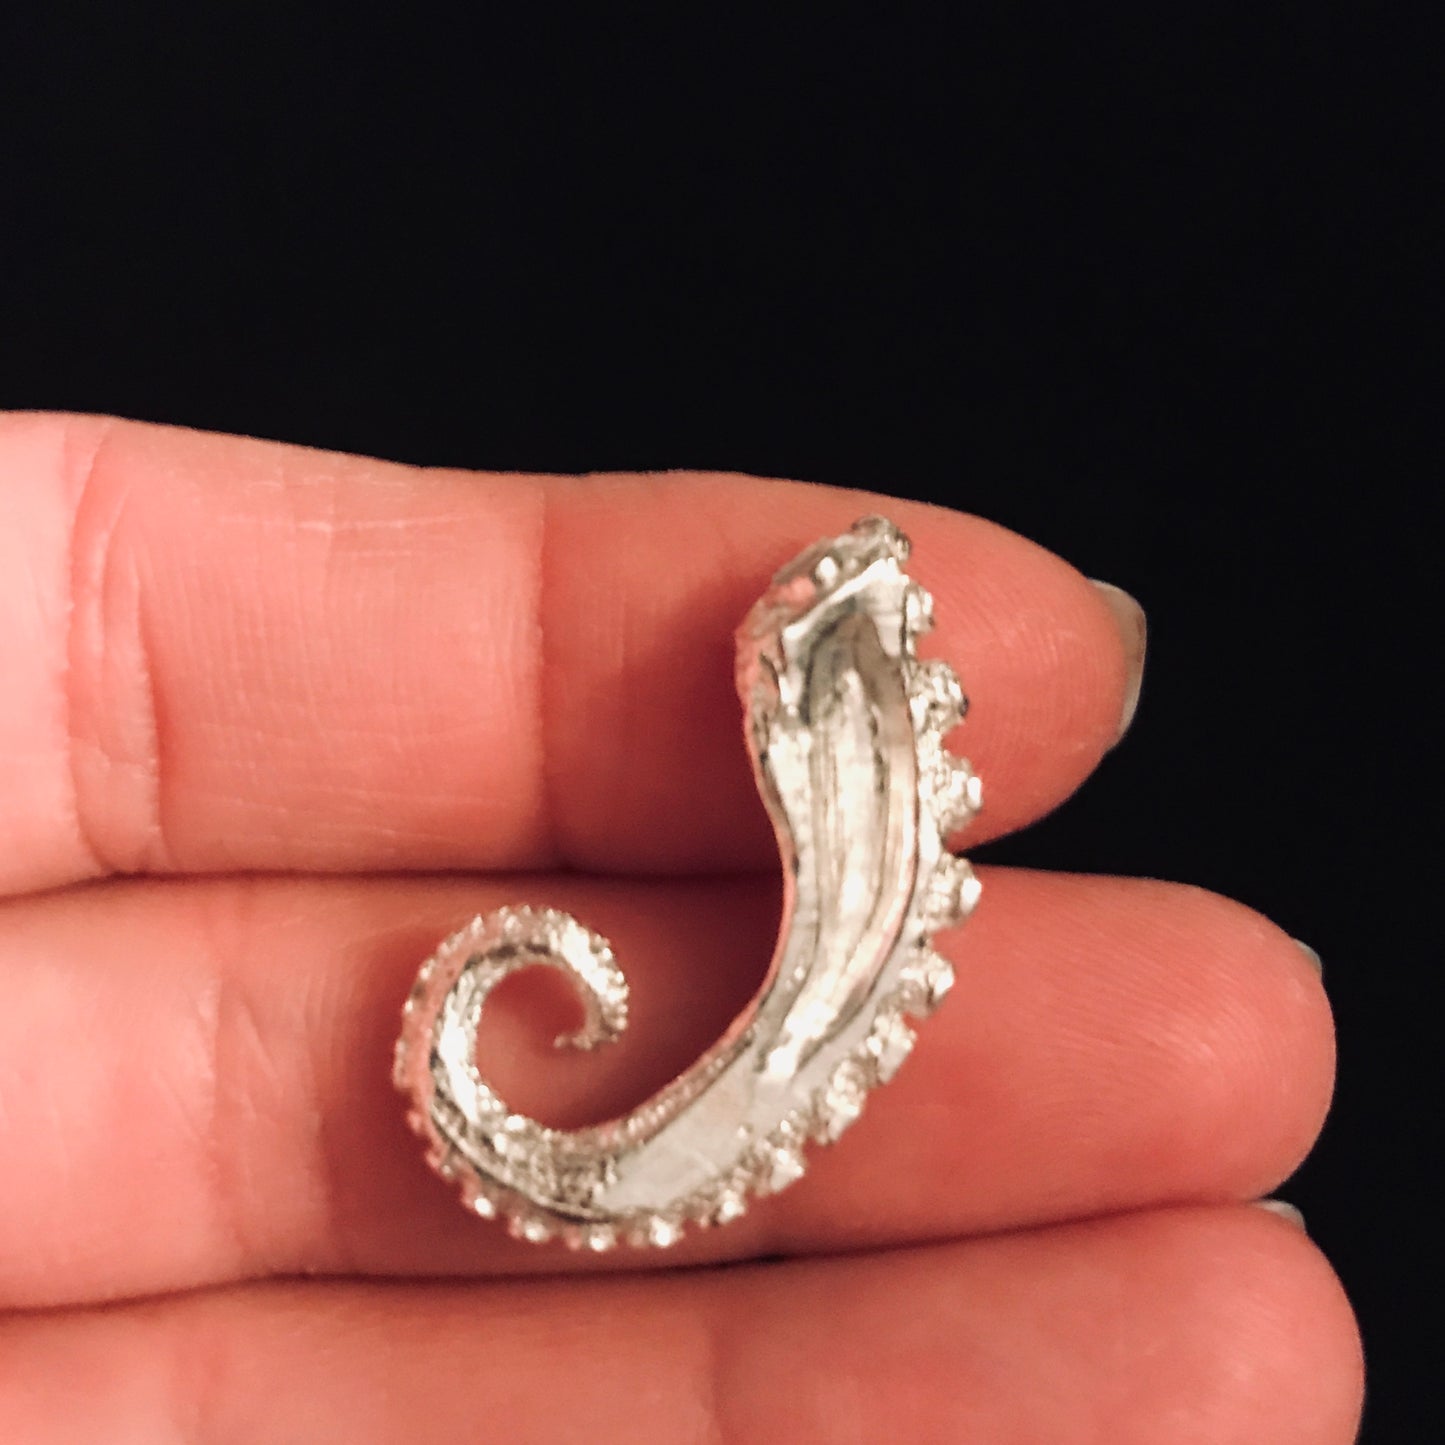 Cast Curled Octopus Tentacle for Jewelry Design